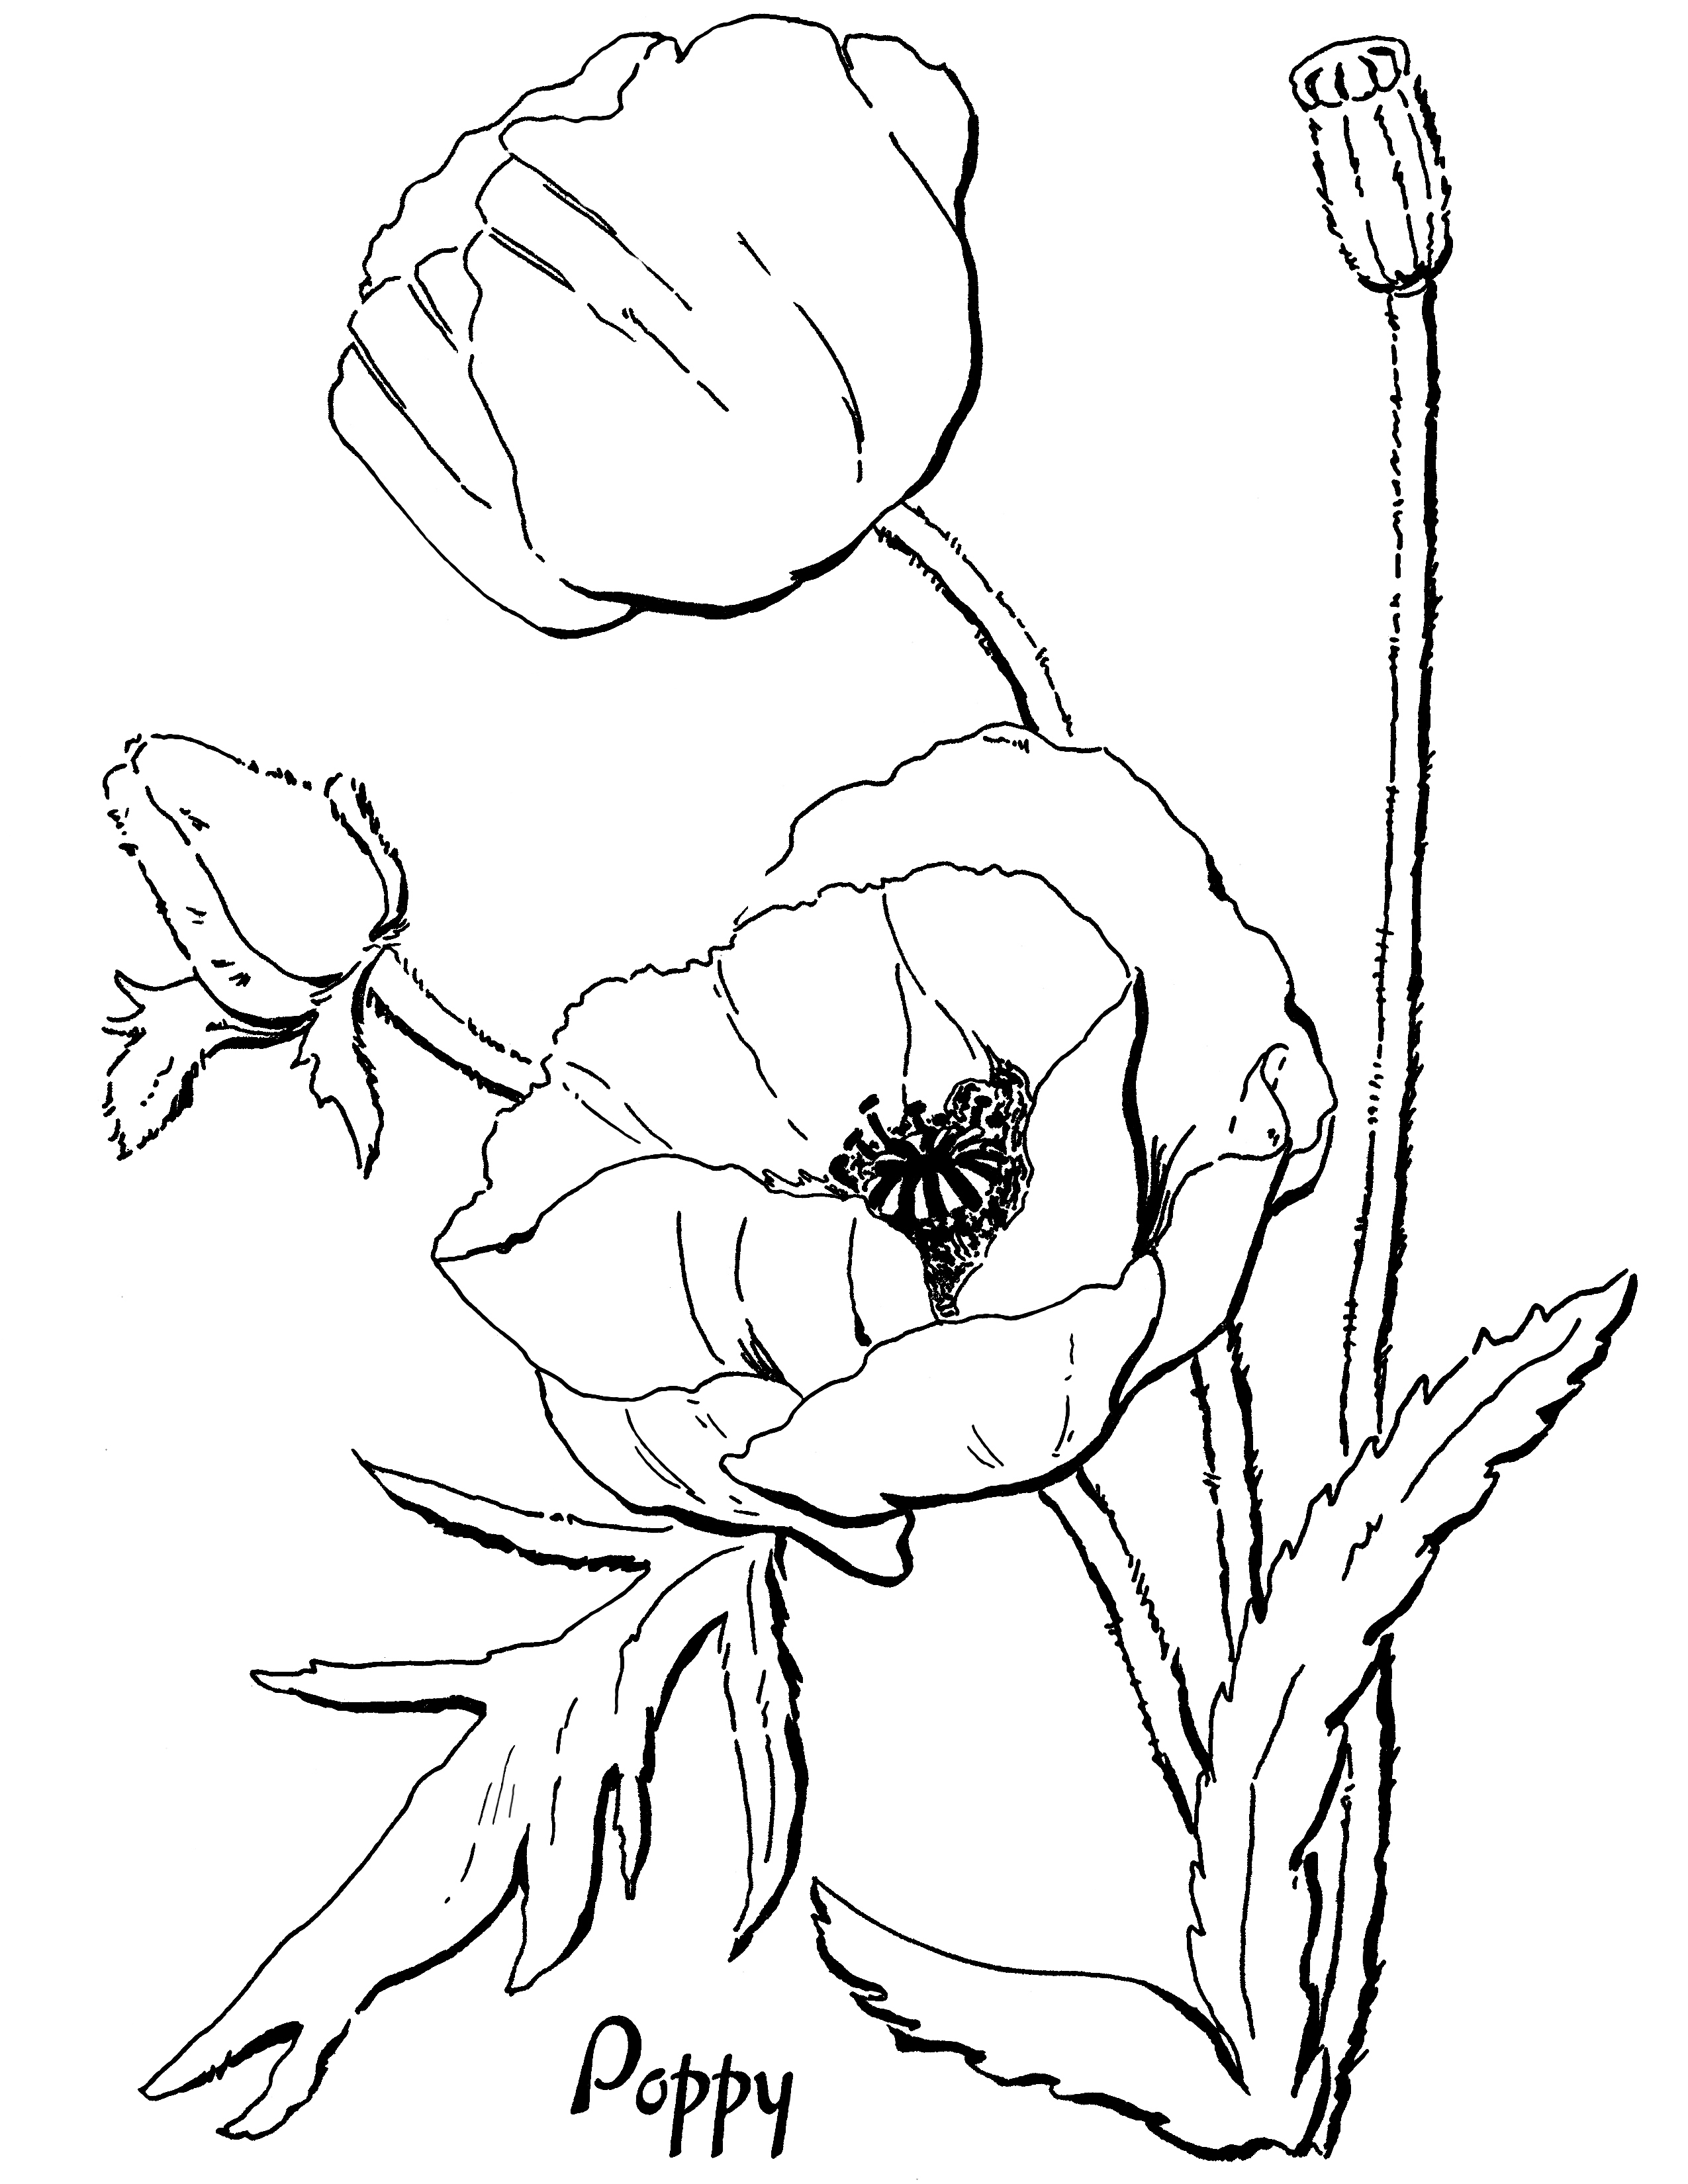 Poppy Coloring Page for Adults! The Graphics Fairy